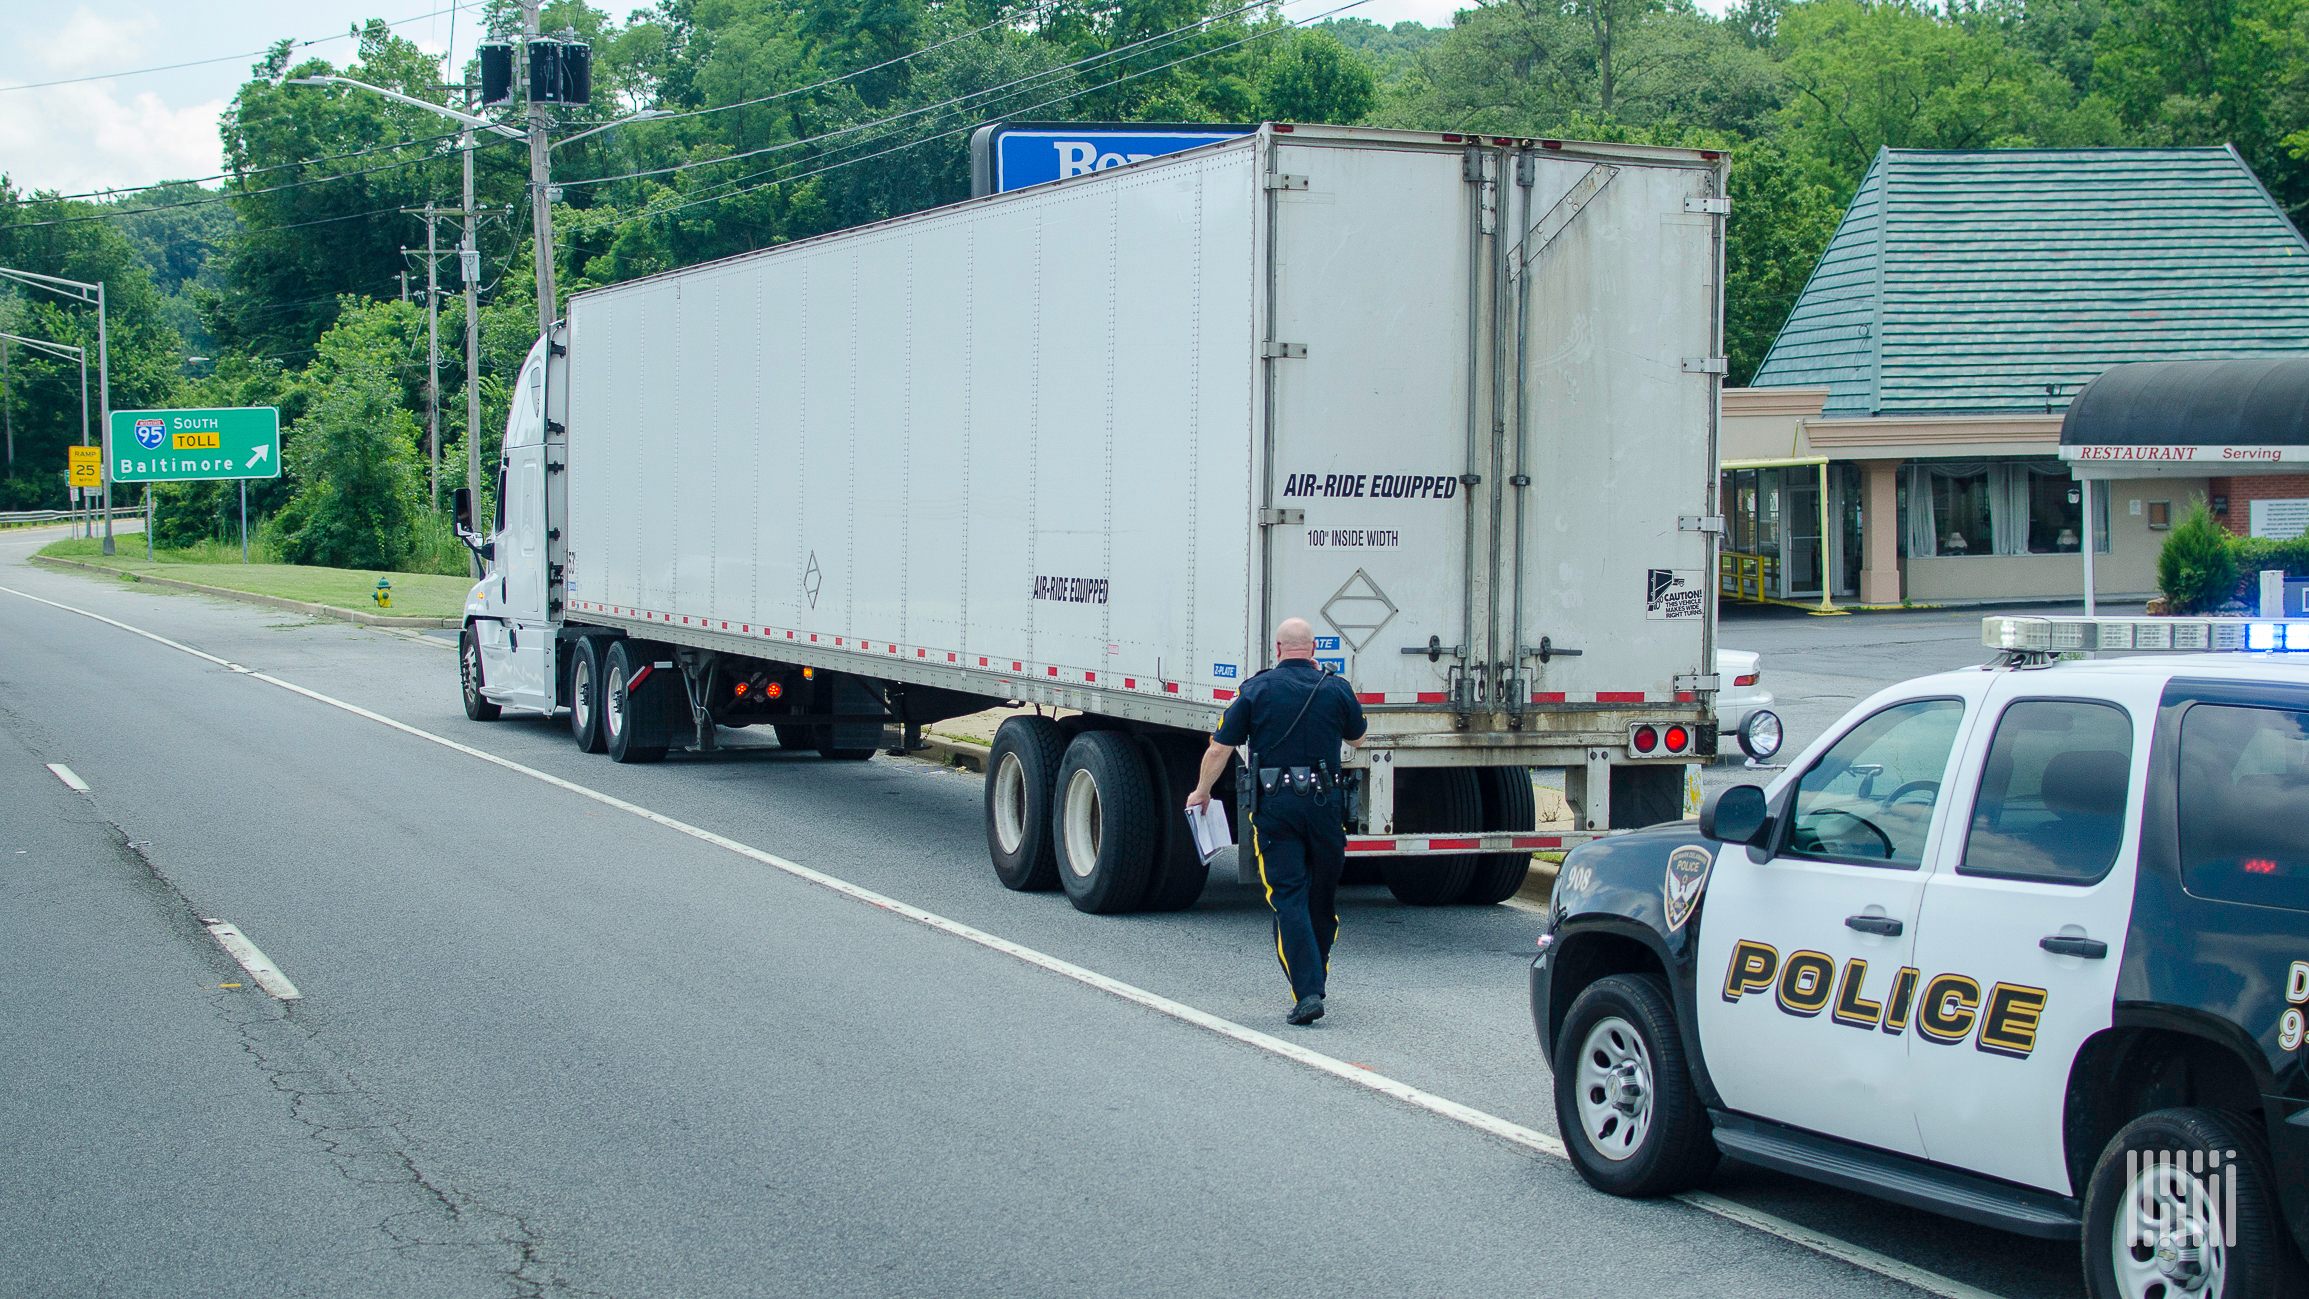 Police officer walks up to tractor trailer truck